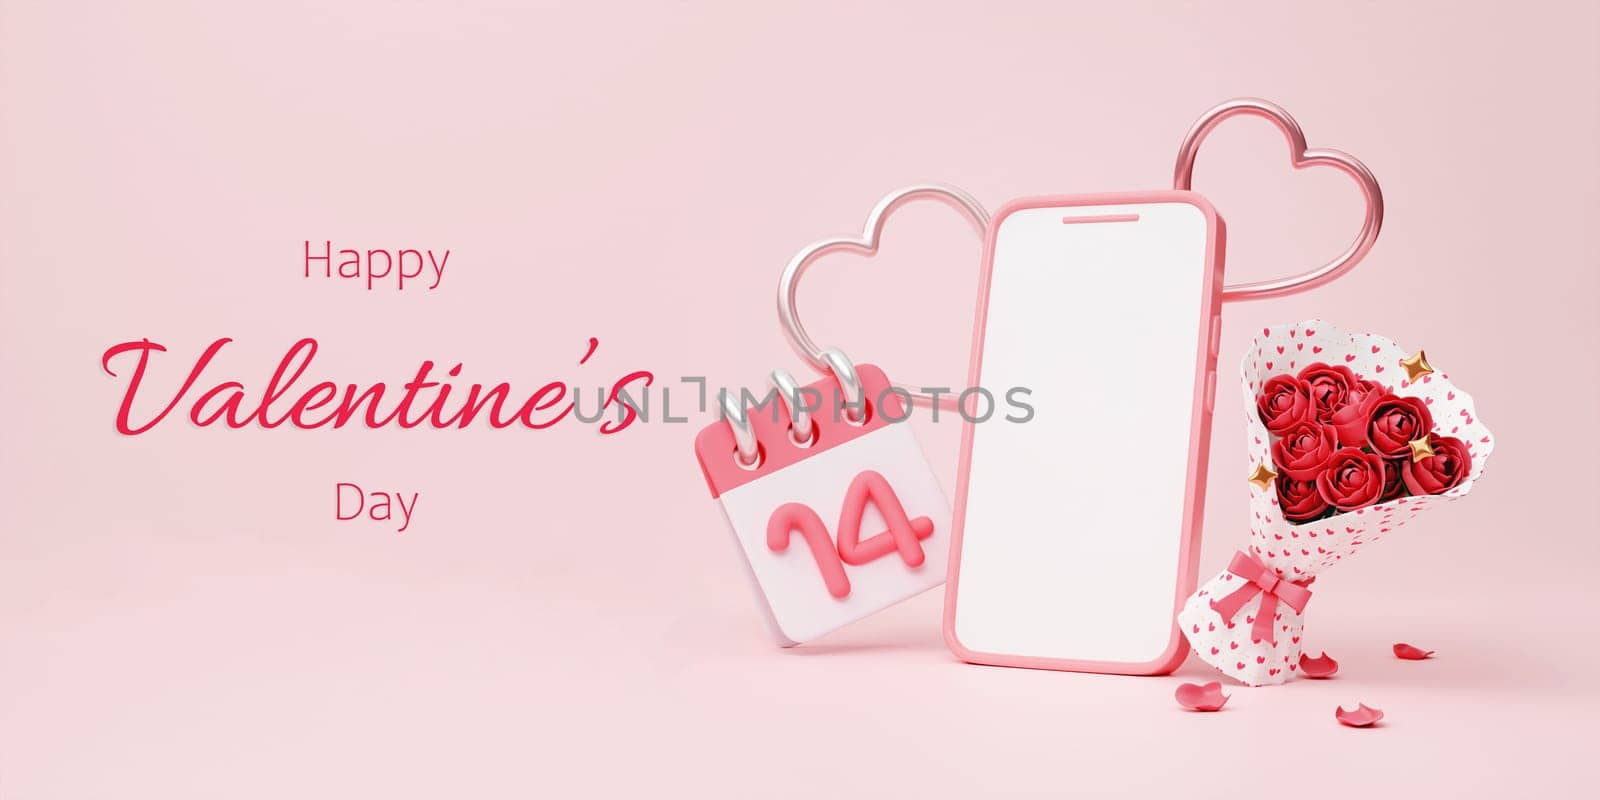 3D rendering mobile phone mockup with hearts for Valentines day background design. Empty generic smartphone blank screen template. 3D render illustration.